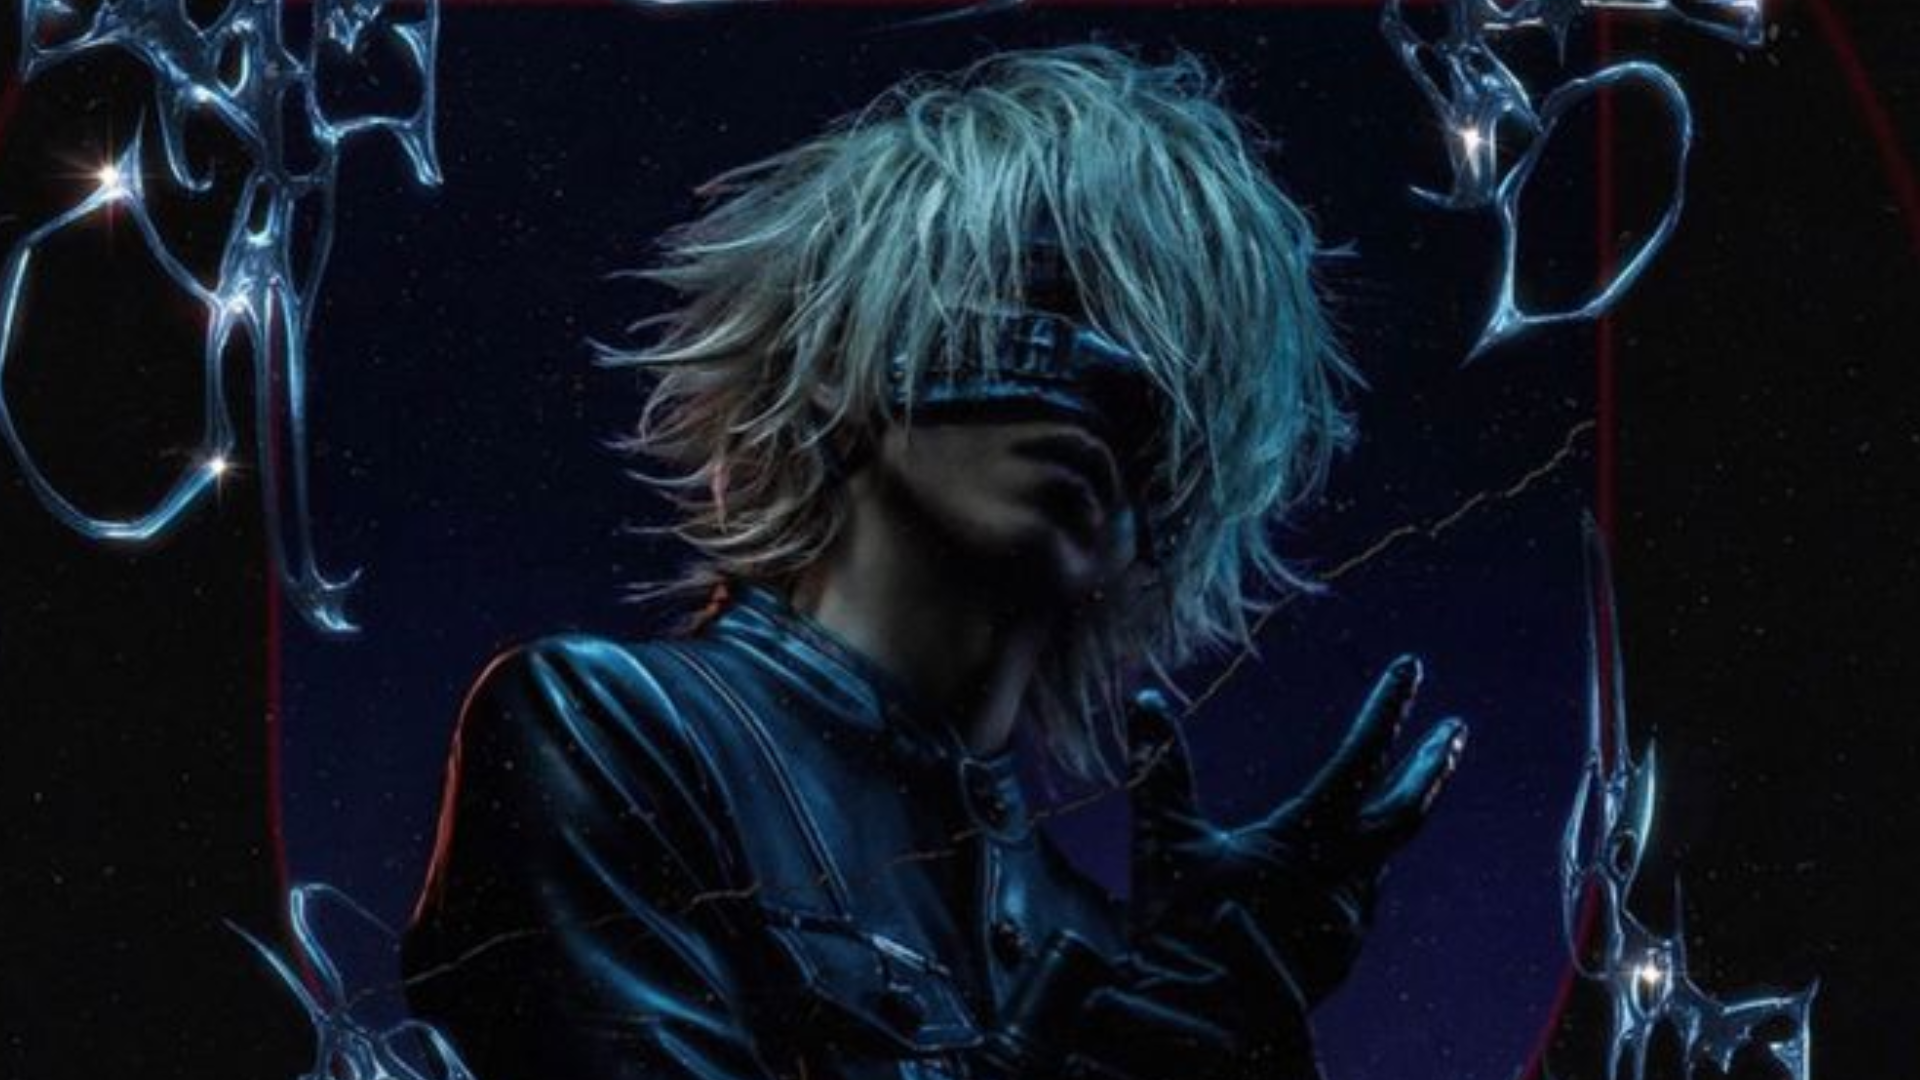 <p>Specifically, Reita was famously known for his unique appearance, often donning headwear that obscured part of his face. Initially, he wore a white cloth to cover his nose but eventually switched to a leather mask.</p> <p>Image: Sony Music</p>